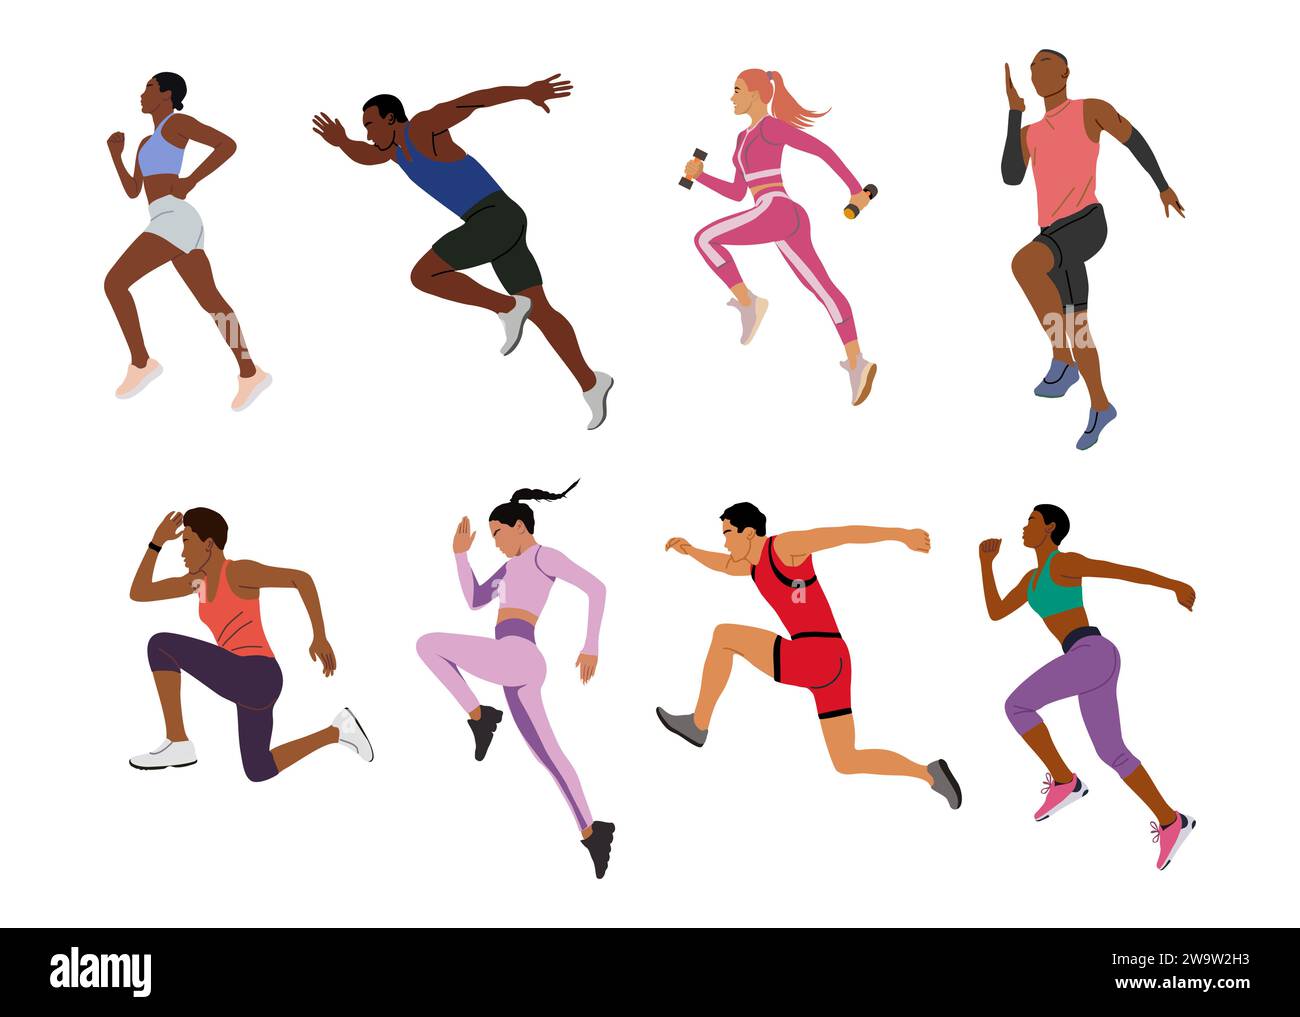 Runners set. Male and female athletes running. Stock Vector